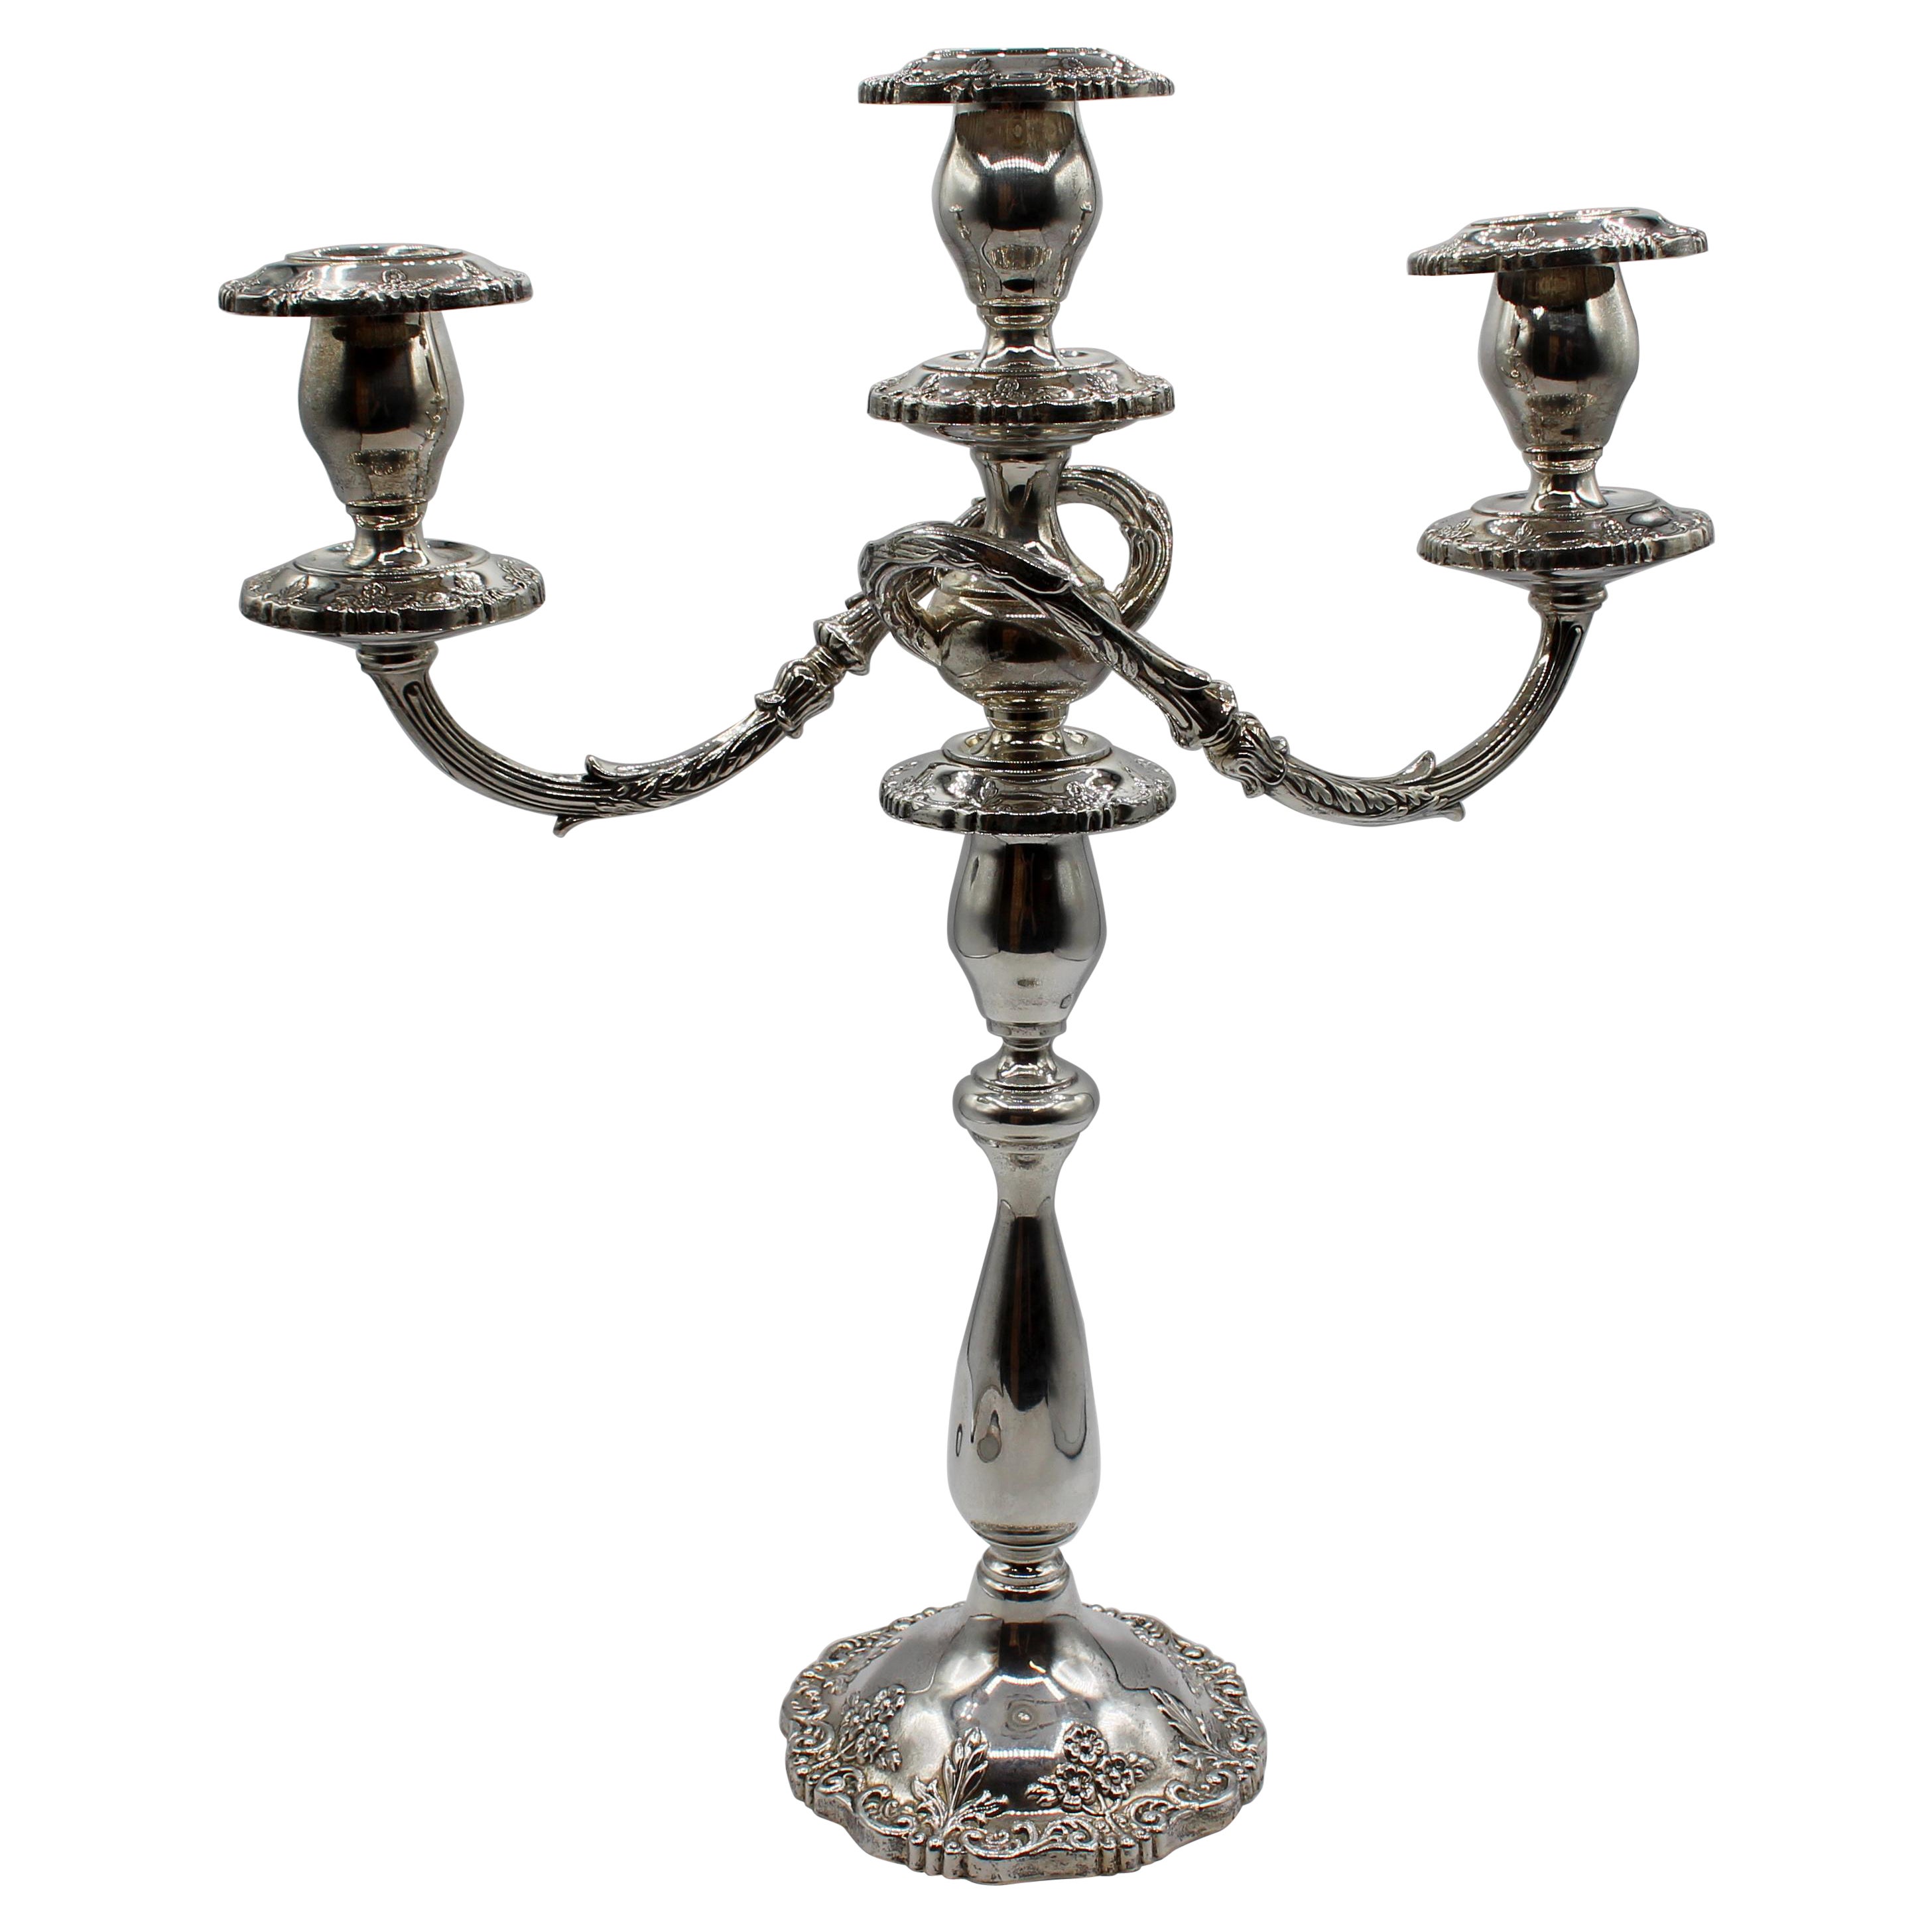 Circa 1950s Sterling Silver Candelabra "English Rose" Pattern For Sale